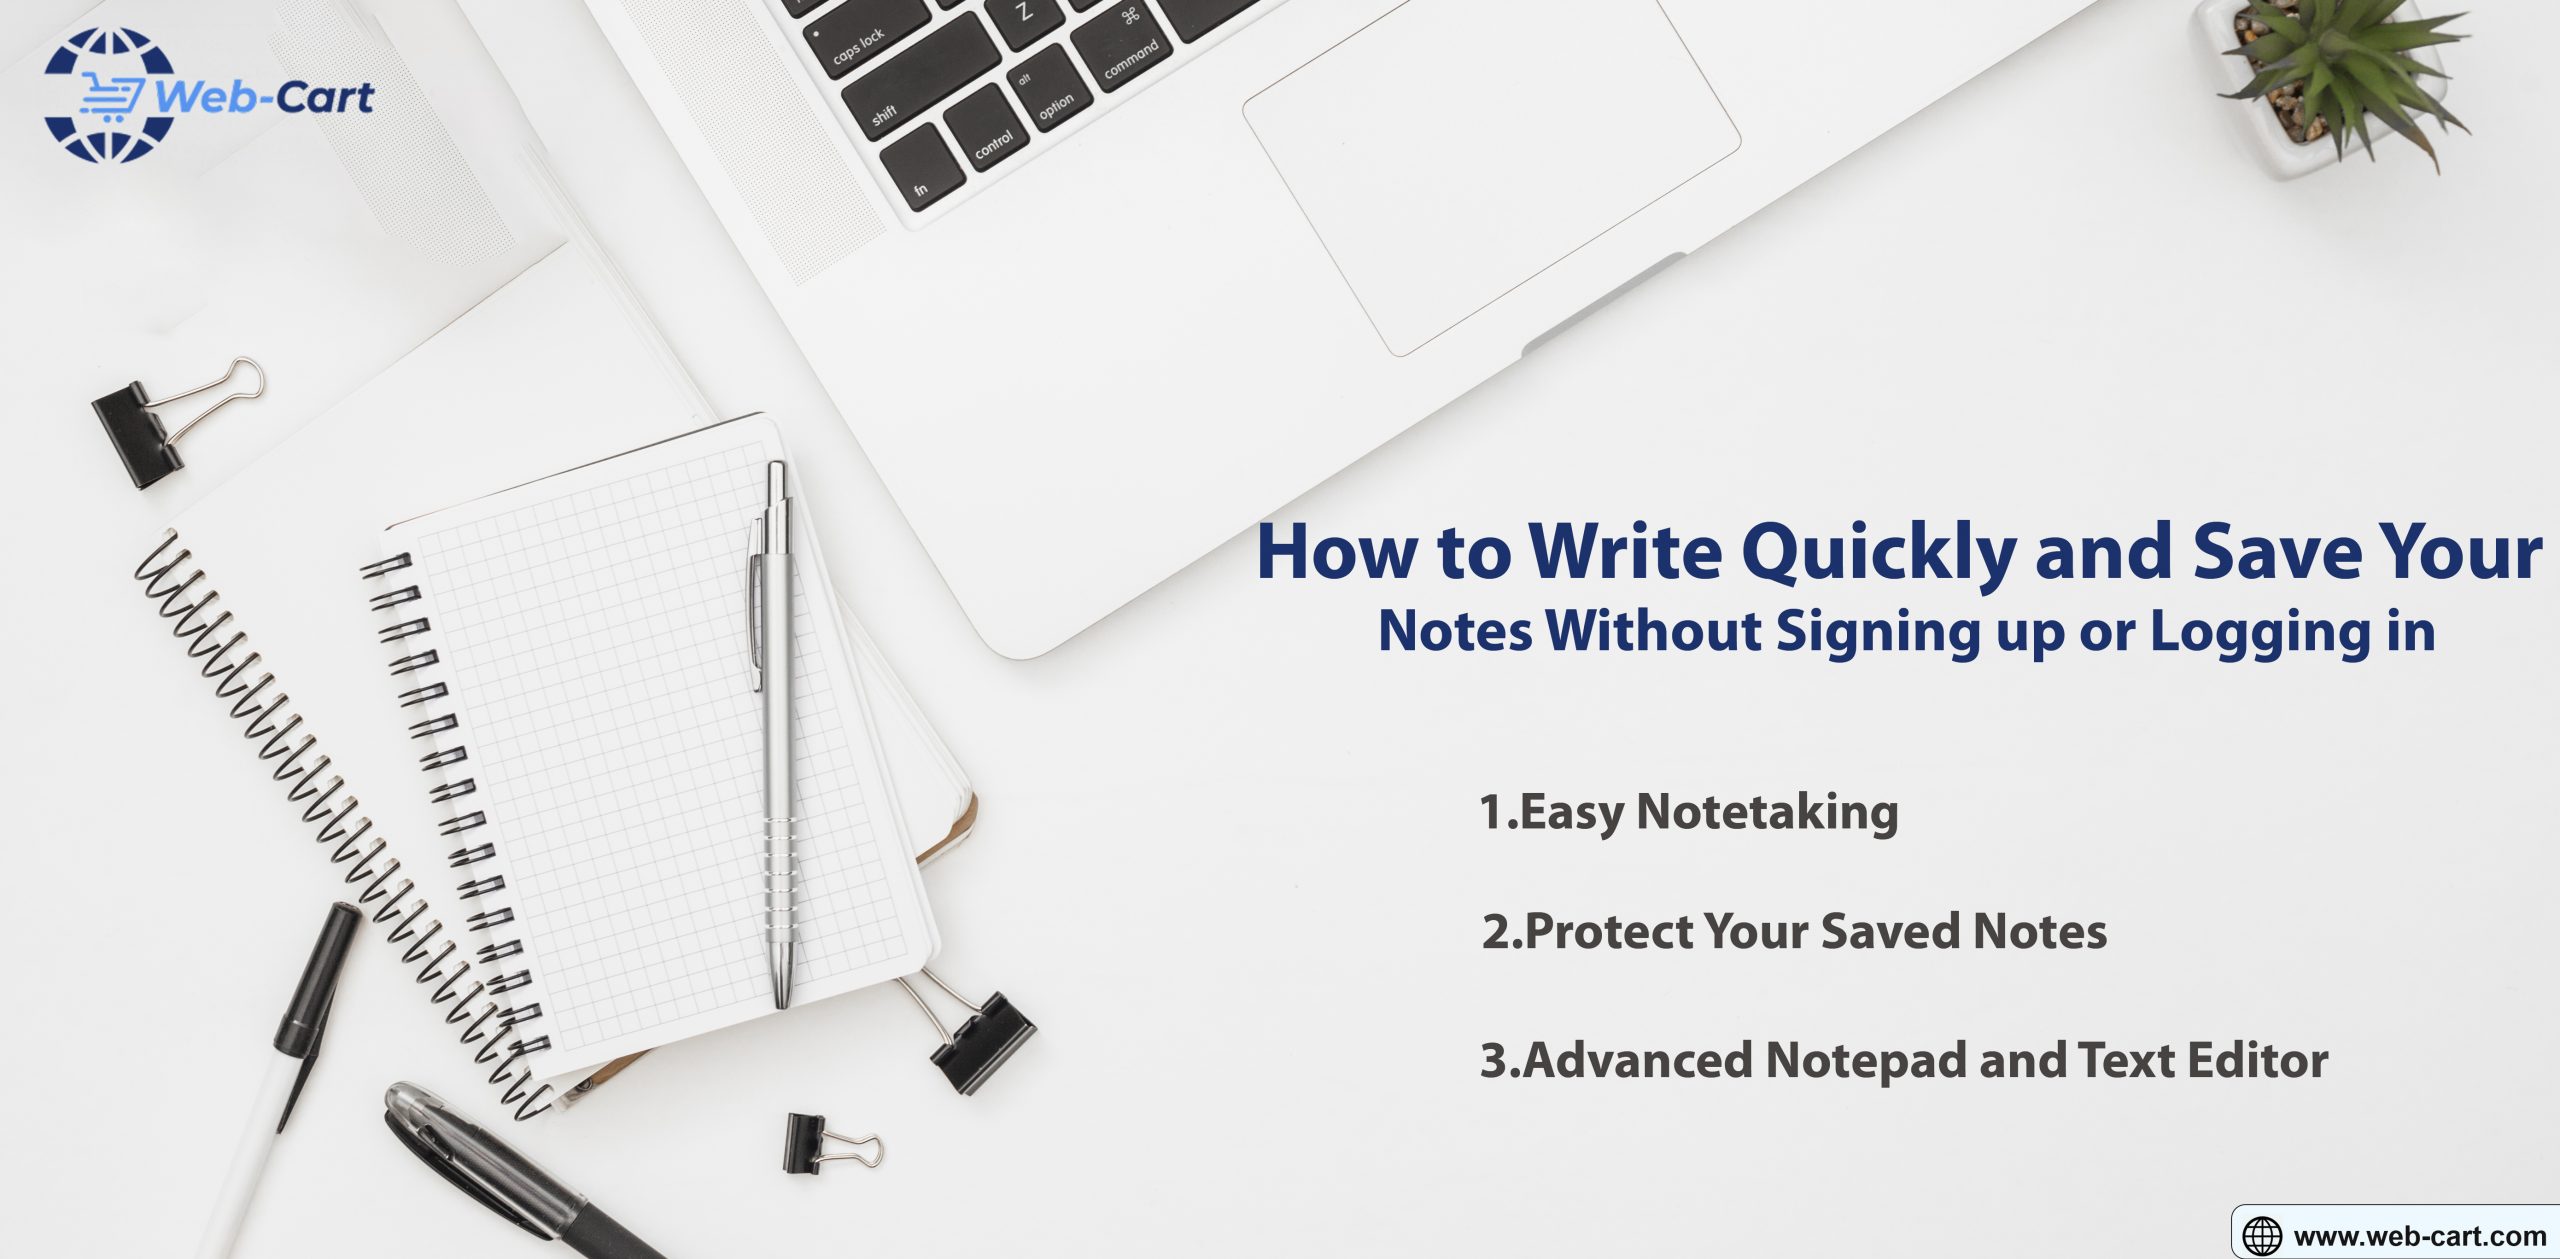 How to Write Quickly and Save Your Notes Without Signing up or Logging in